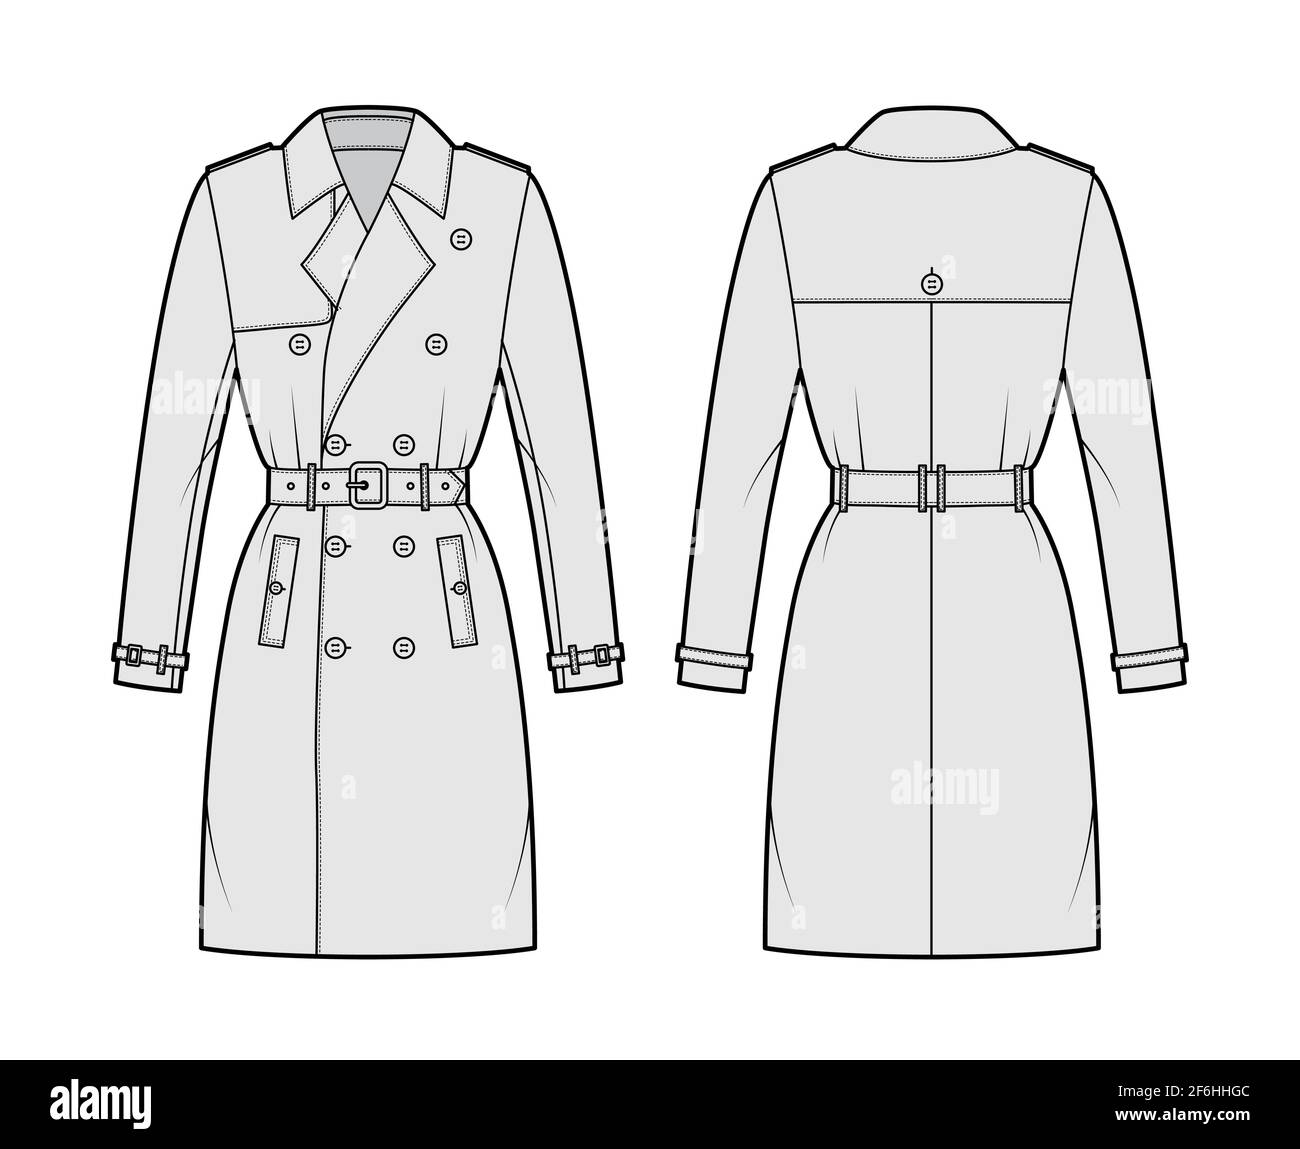 Trench coat technical fashion illustration with belt, double breasted, fitted, wide lapel collar, knee length, storm flap. Flat jacket template front, back, grey color style. Women unisex CAD mockup Stock Vector